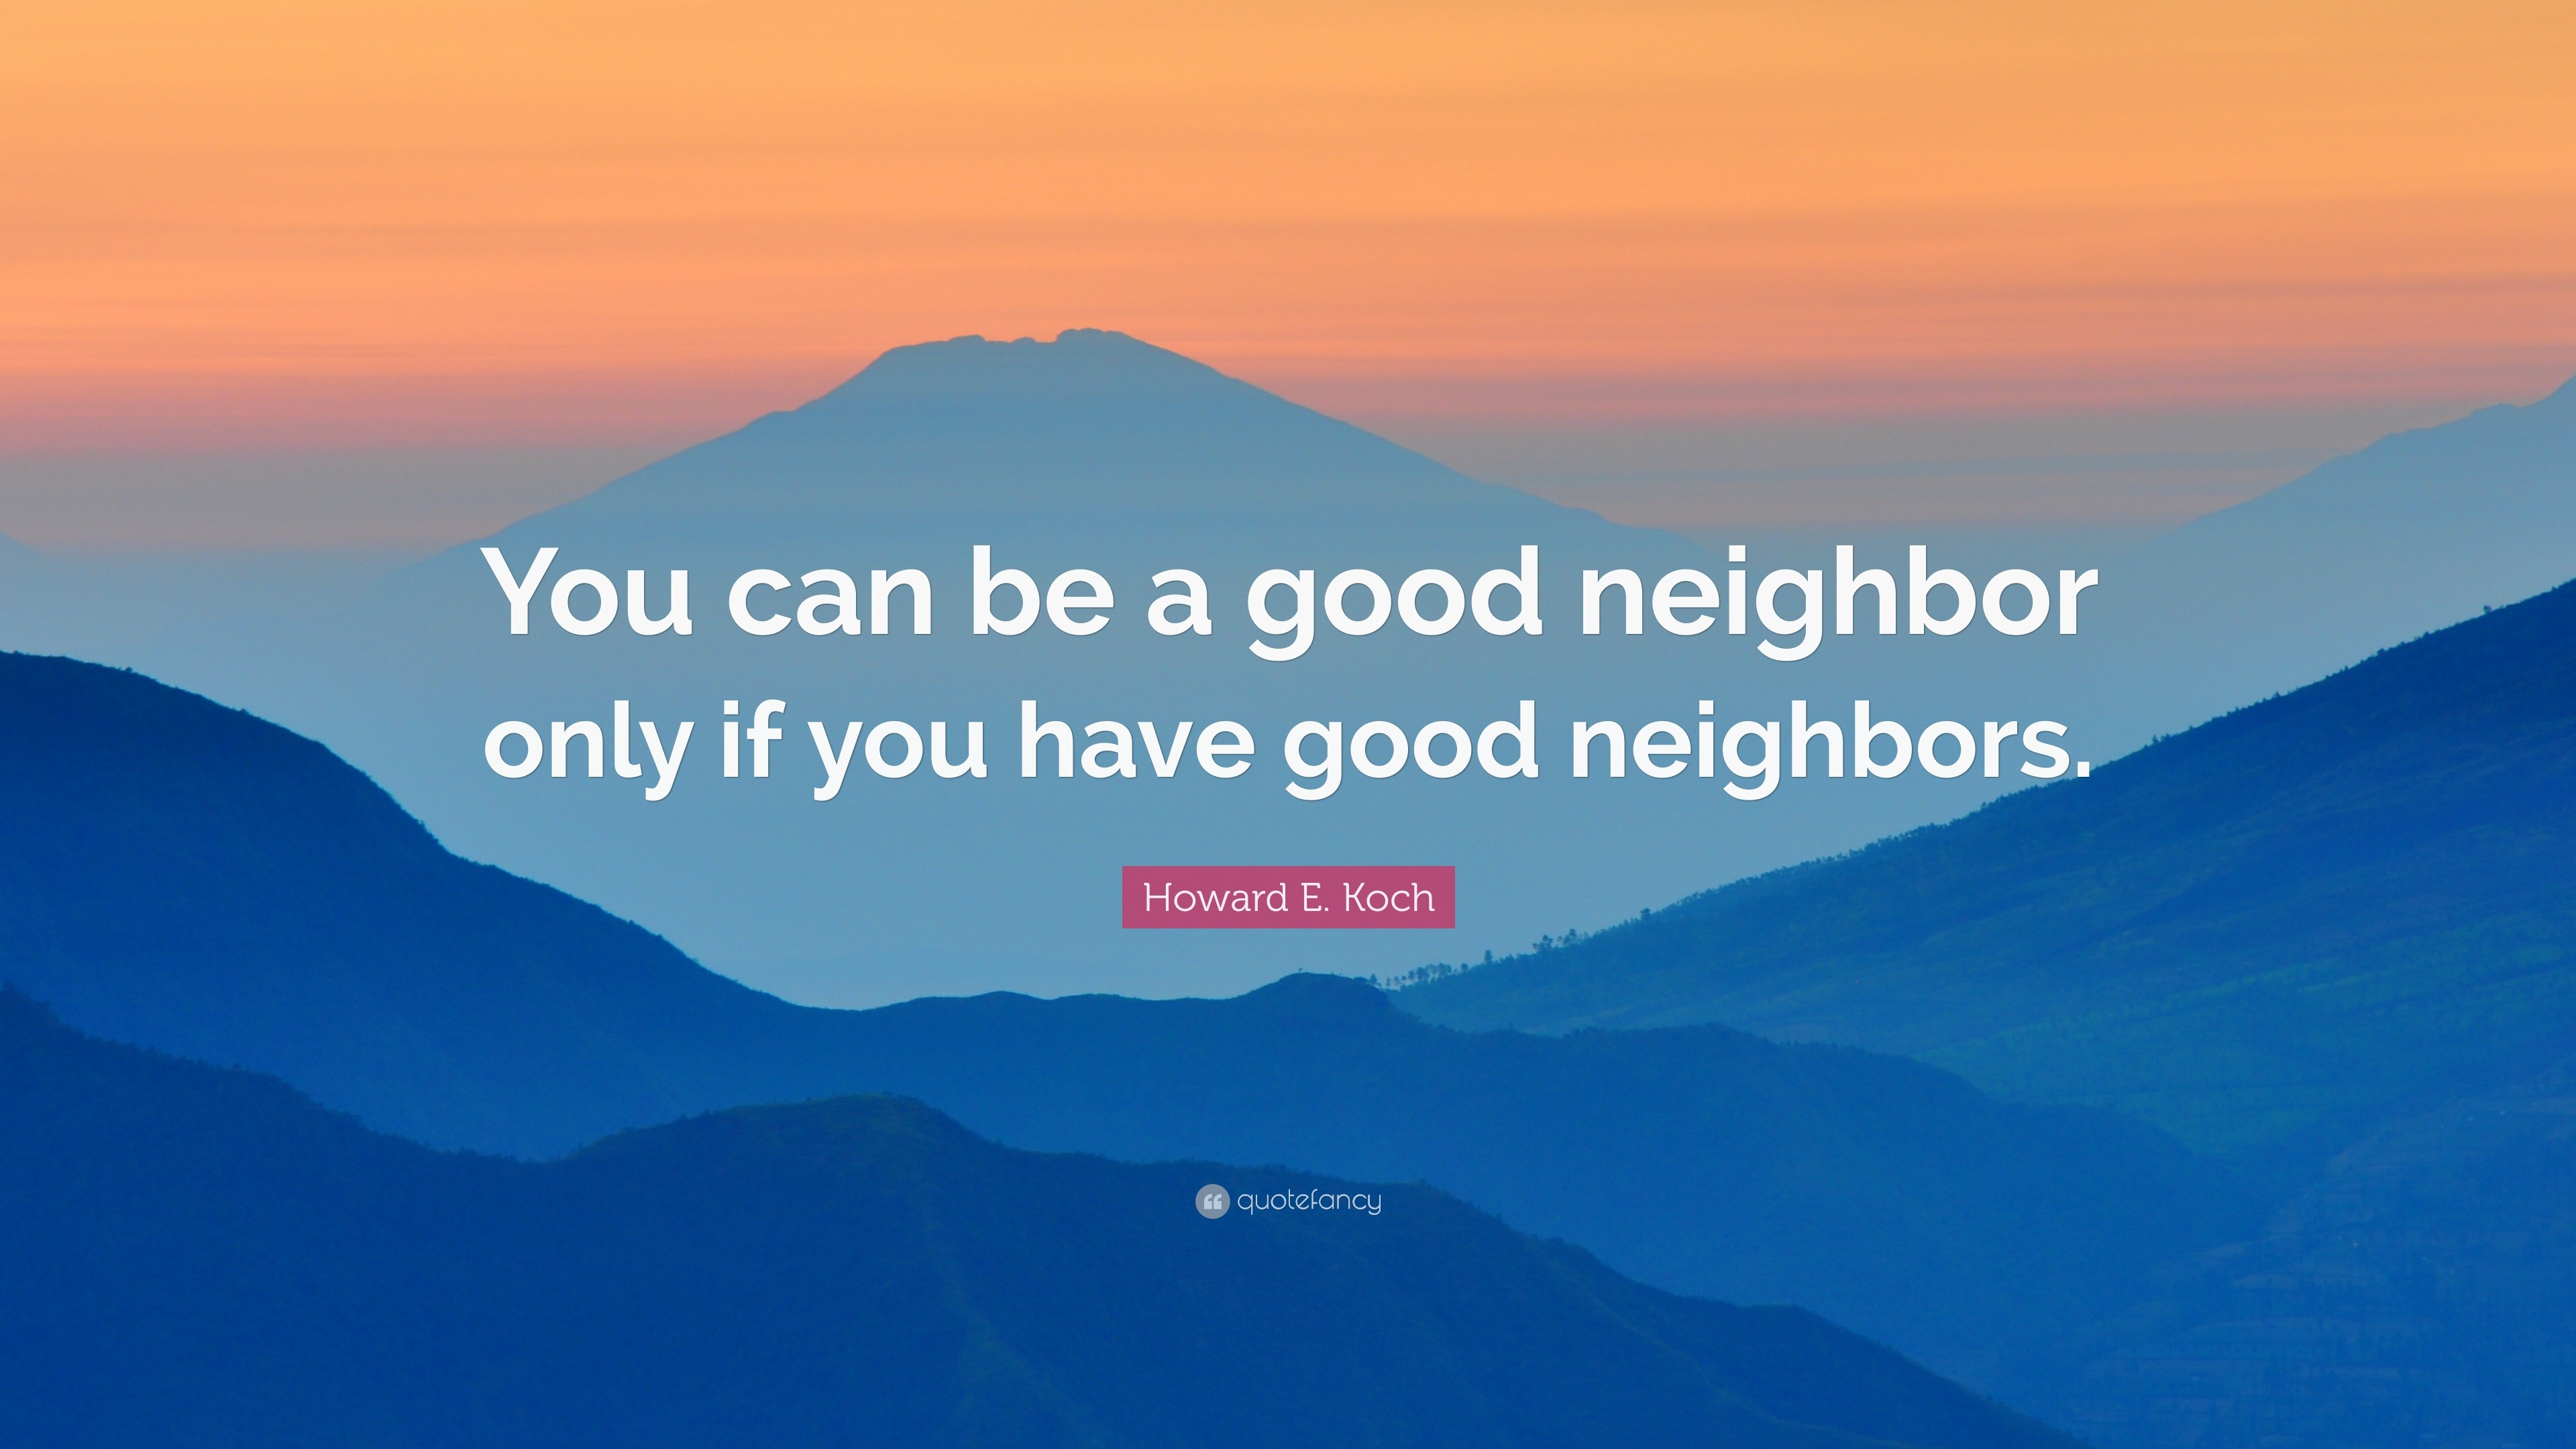 Howard E. Koch - You can be a good neighbor only if you